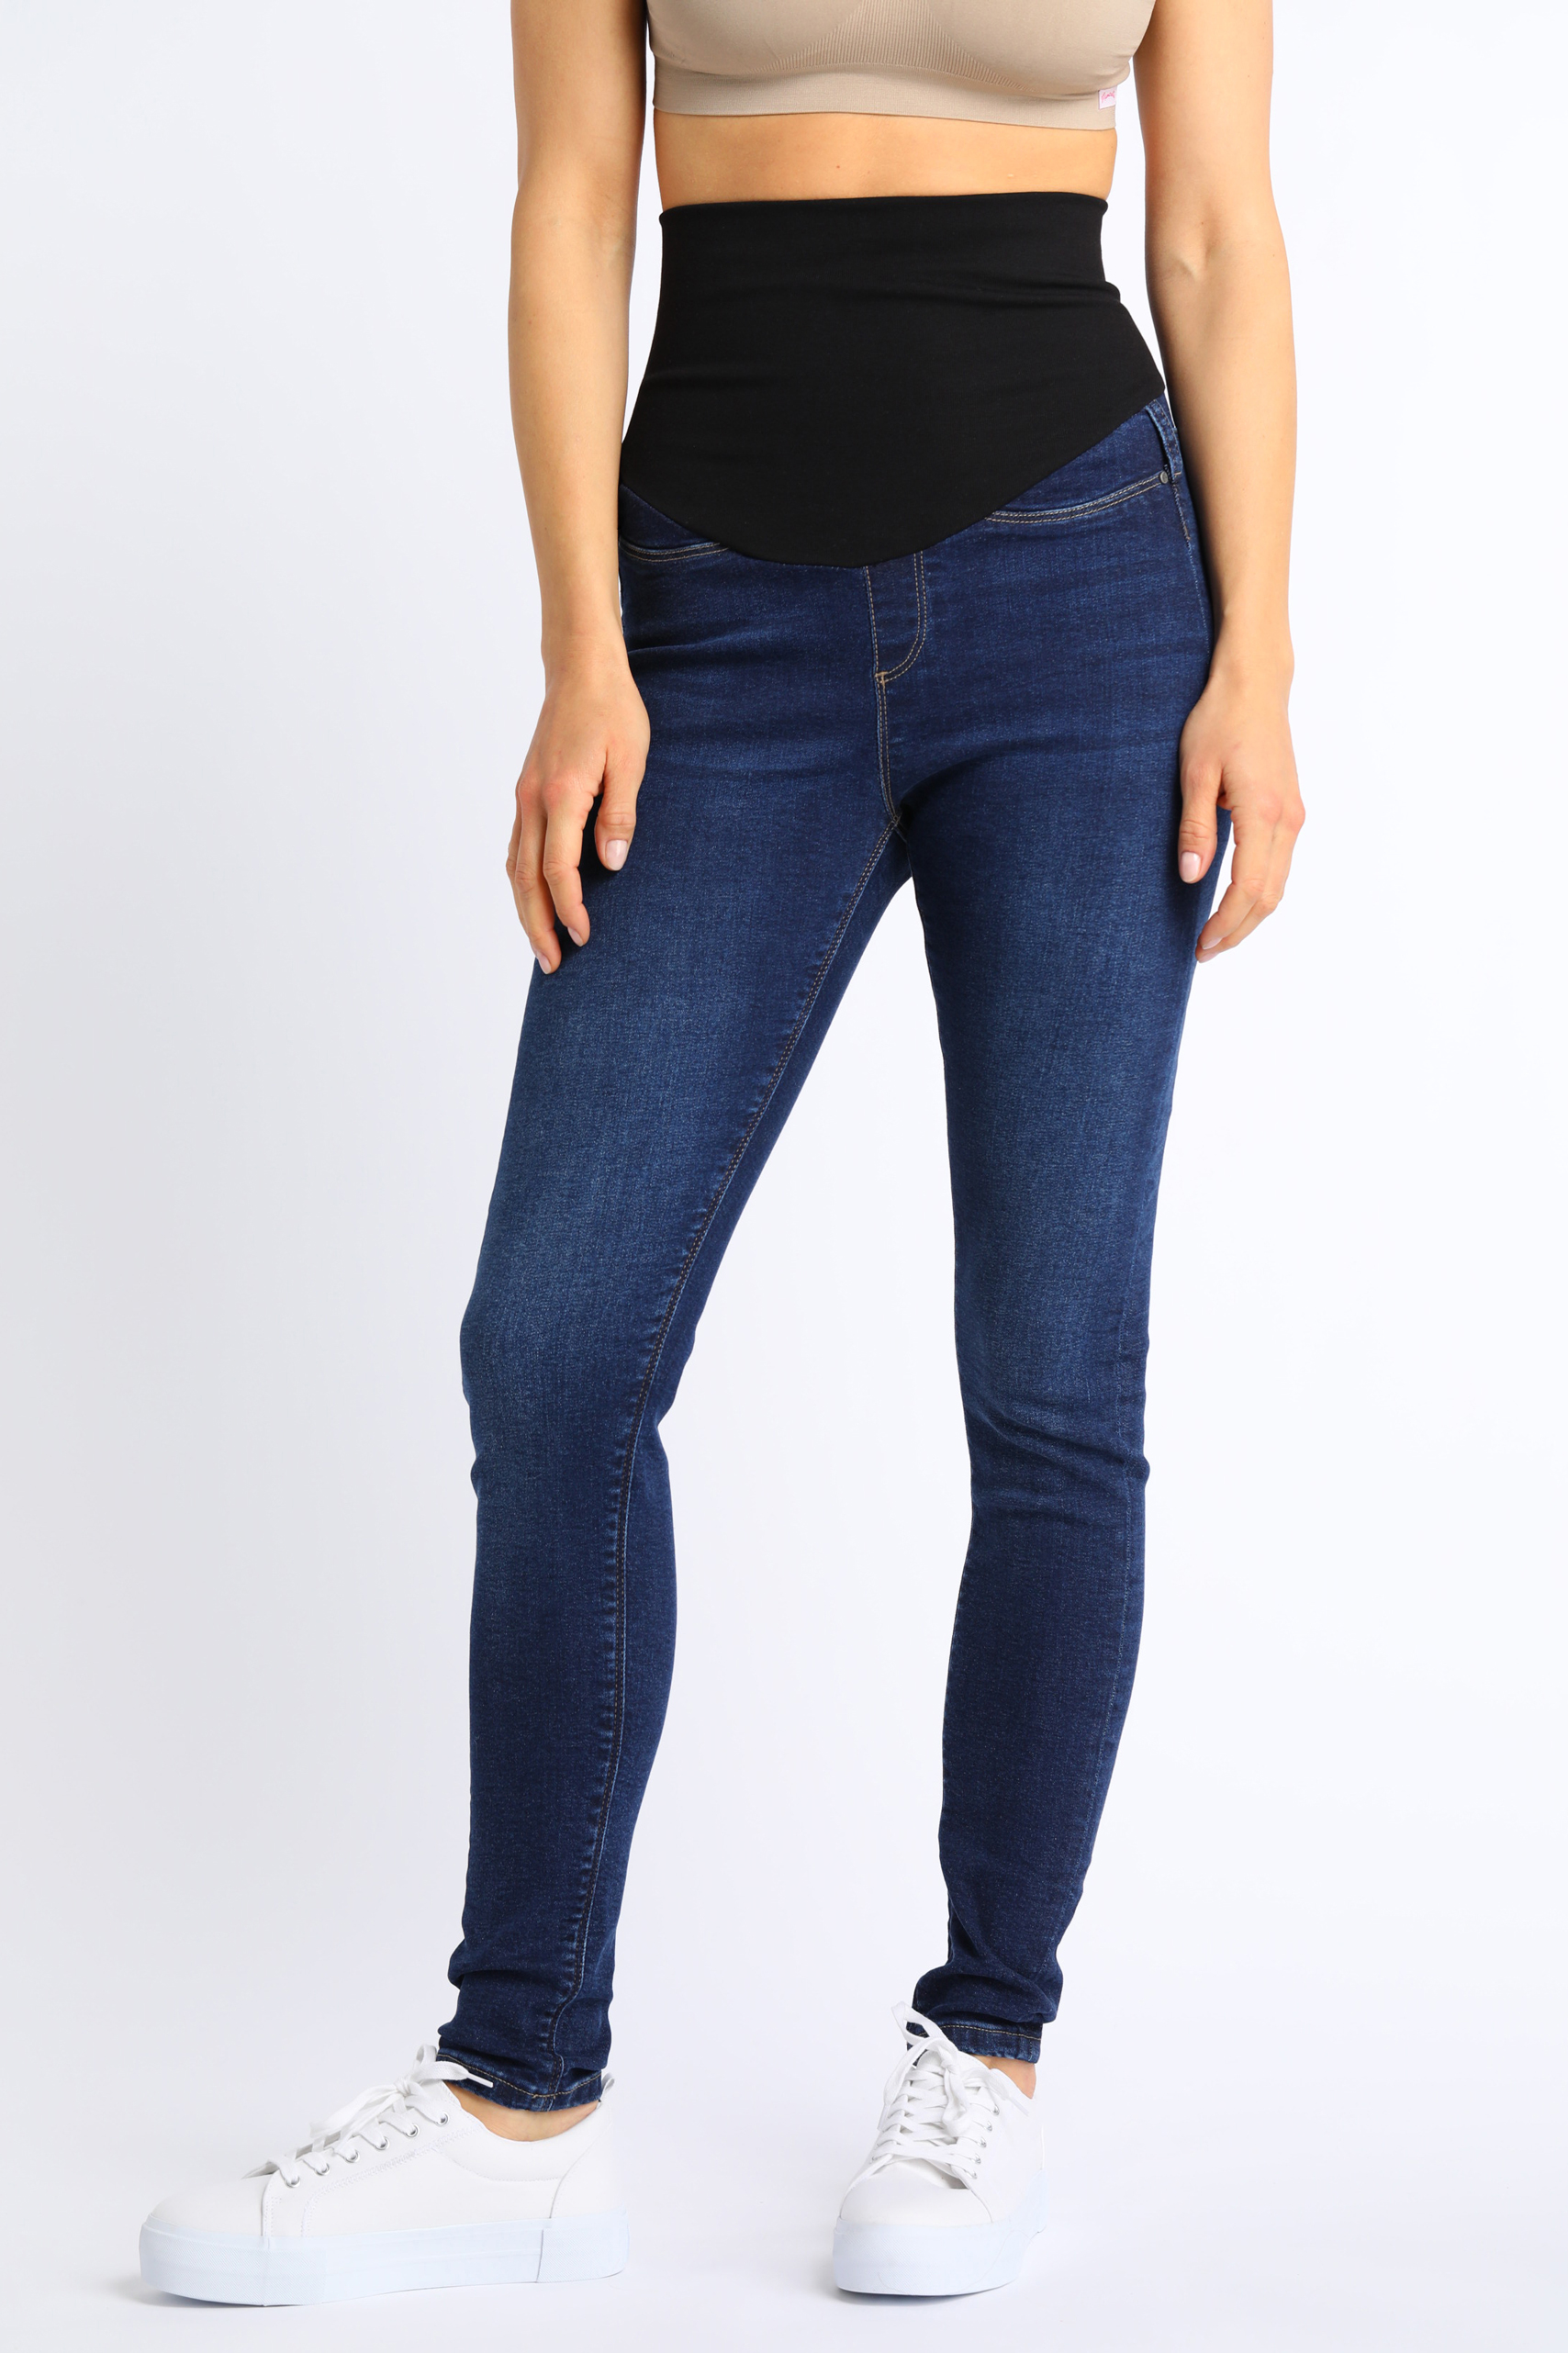 Organic Post Partum Shaping Jeans order online